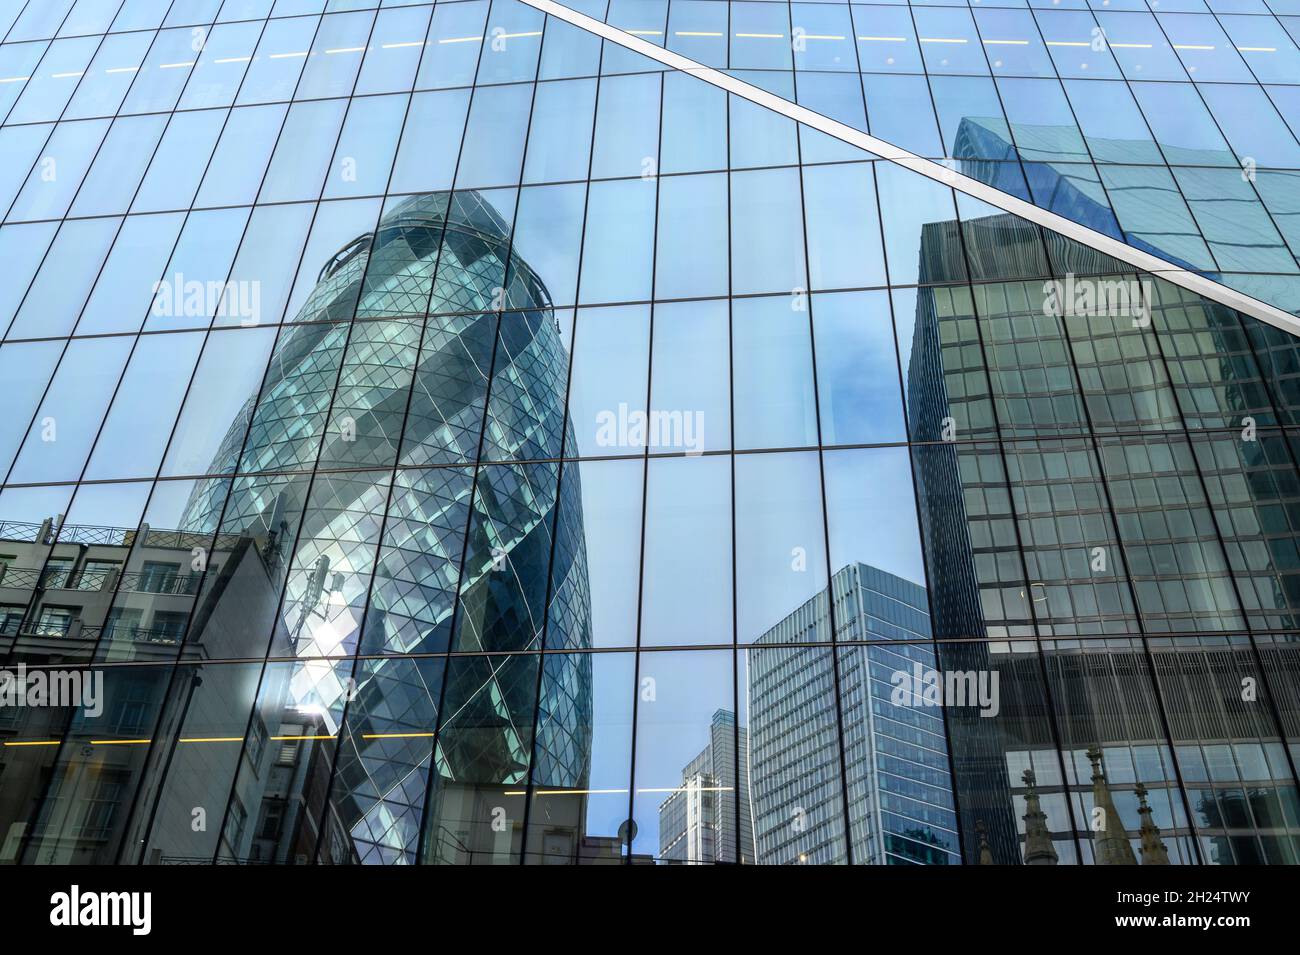 The Gherkin and other buildings reflected in the glass facade of The Scalpel building in City of London, England. Stock Photo